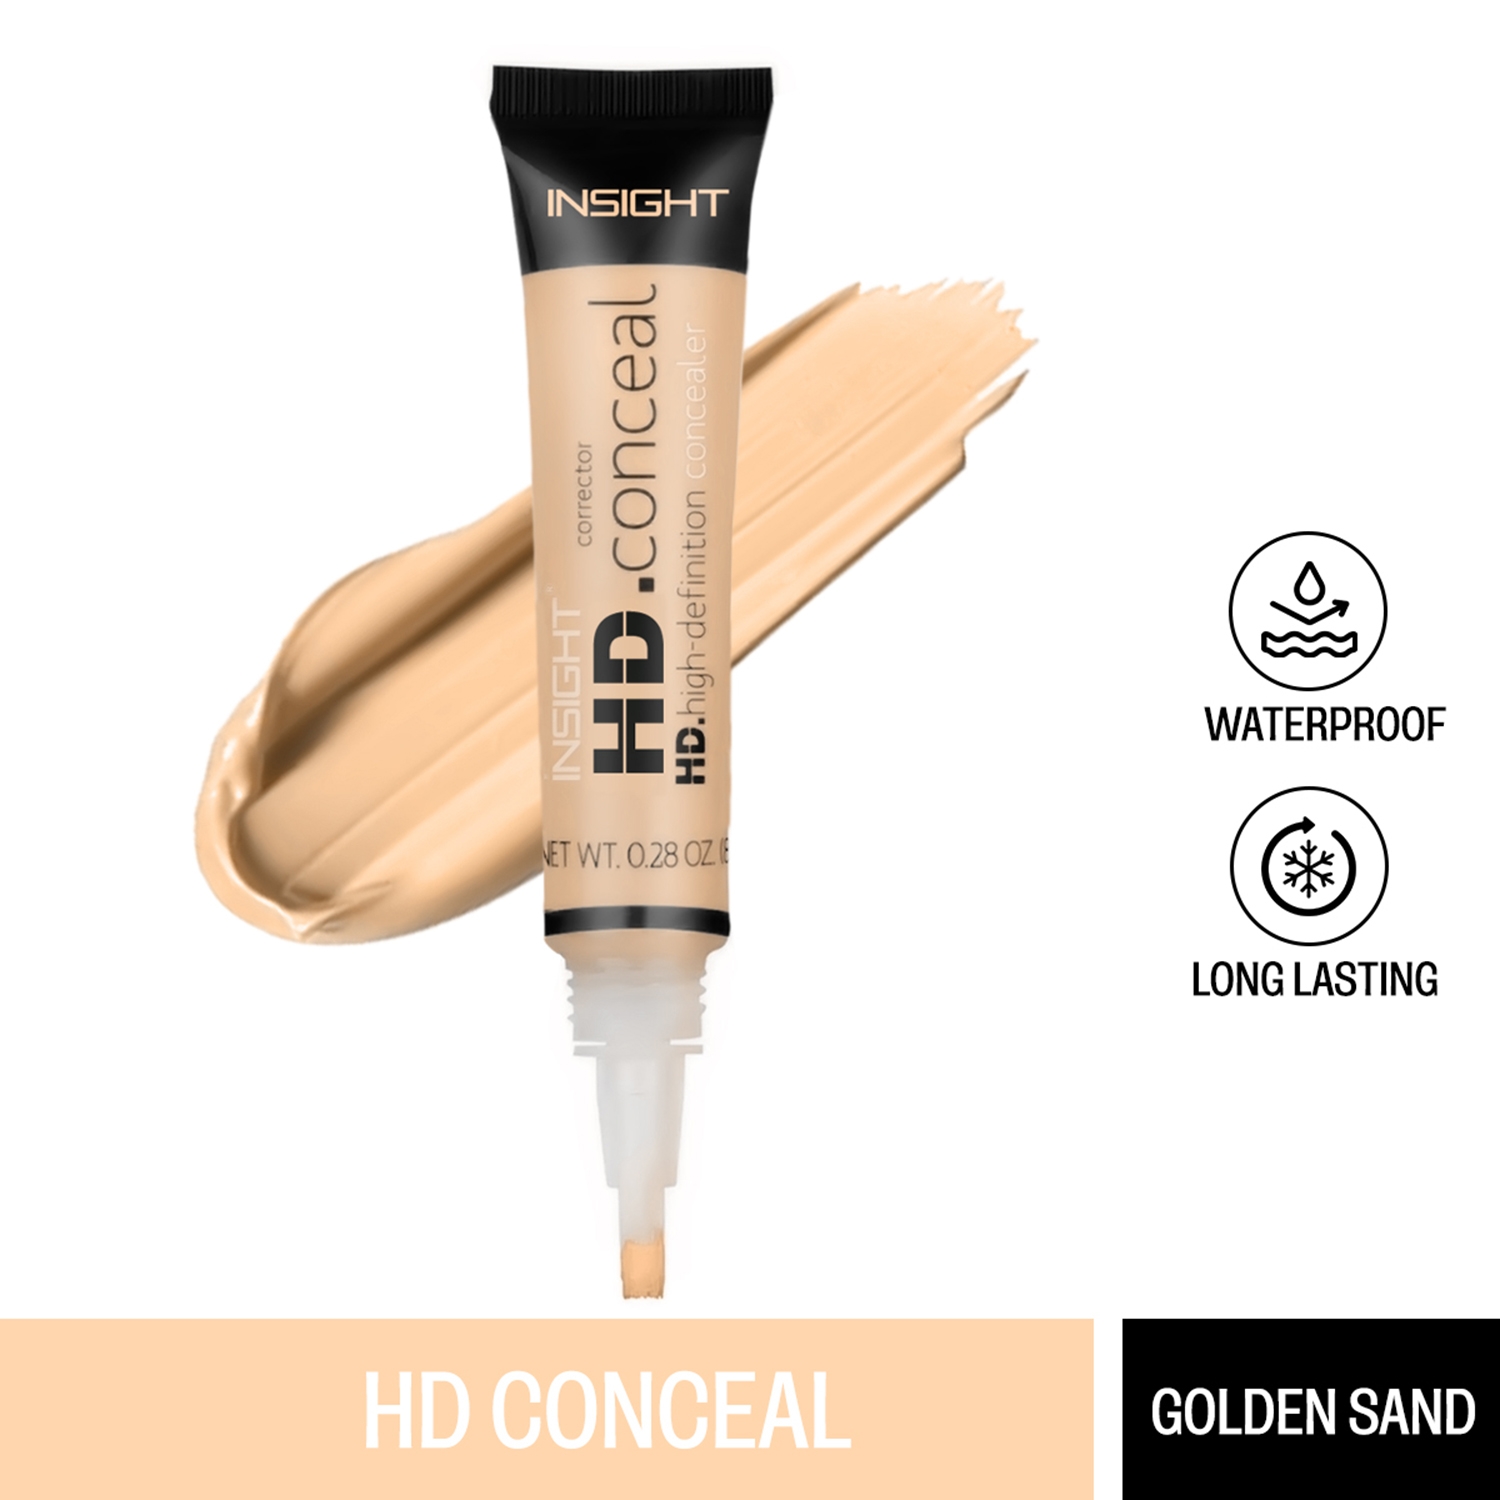 Insight Cosmetics | Insight Cosmetics HD Conceal - Golden Sand (8g)